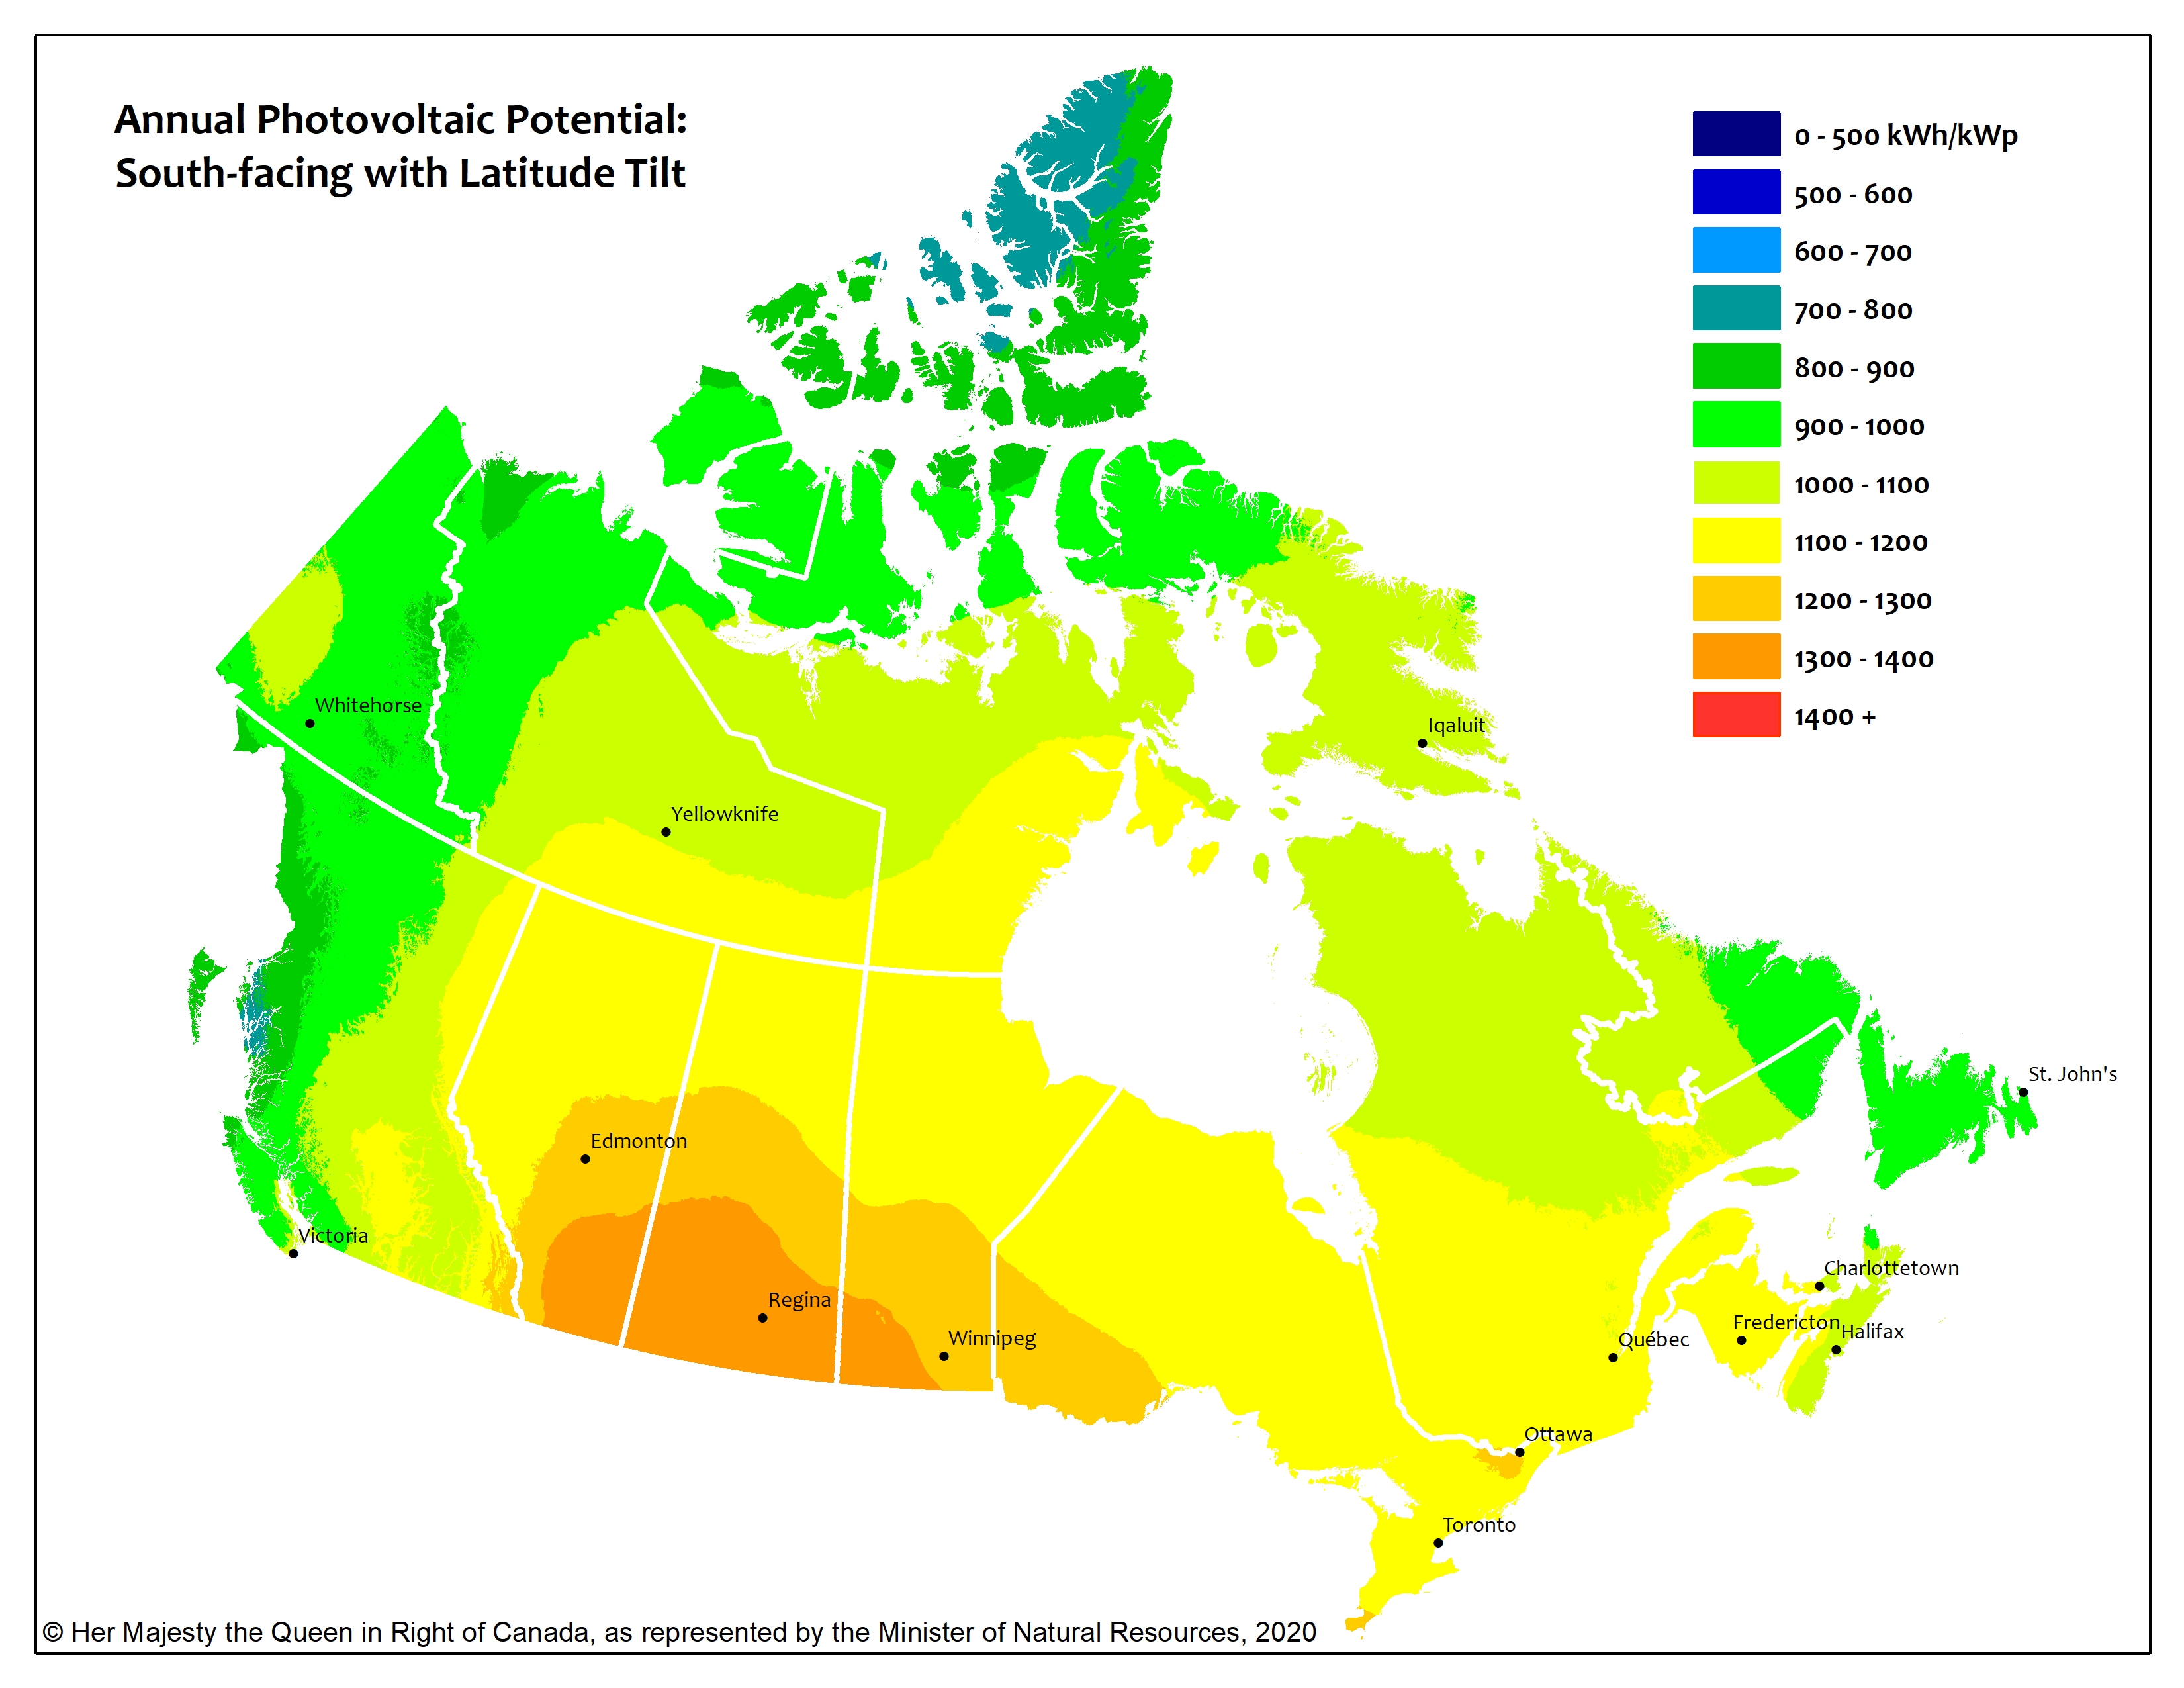 The image shows a map of Canada with different areas of the country shaded in green, light green, yellow, orange, and dark orange, based on the annual photovoltaic potential for that region.